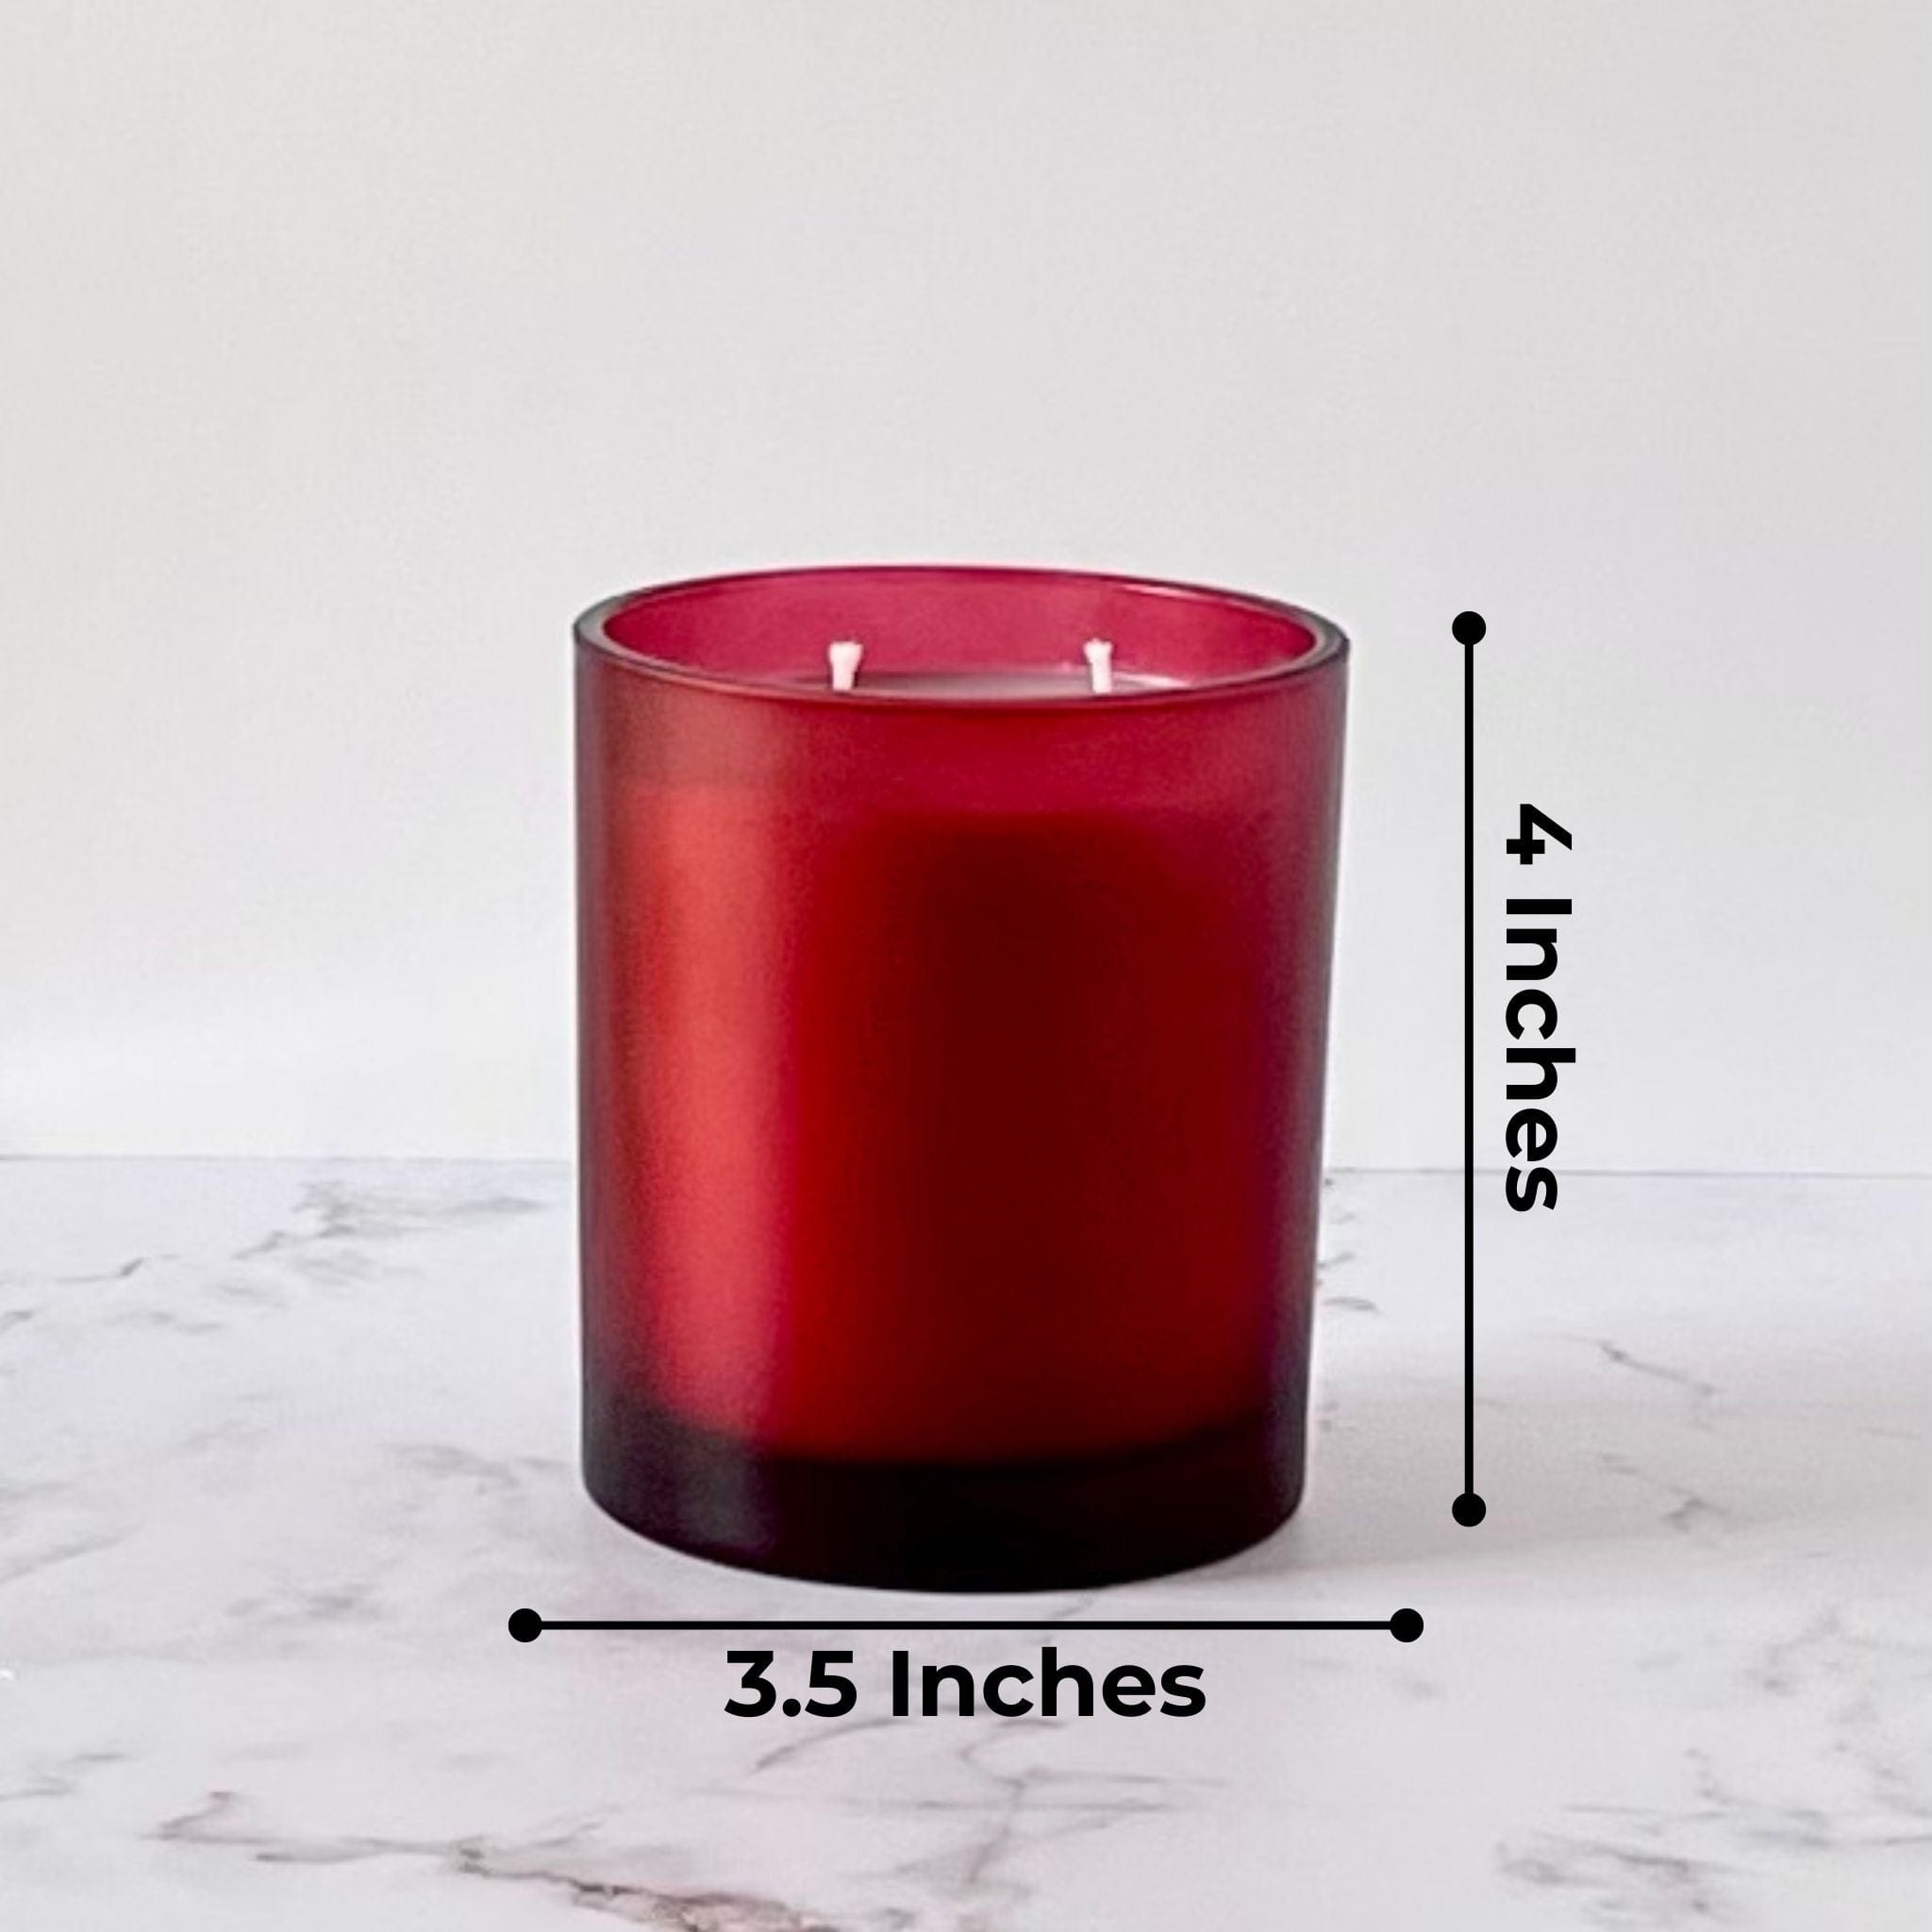 Private Label Candles by Velavida Candles 14 Oz Red Frosted Private Label Candles (12 Candles)